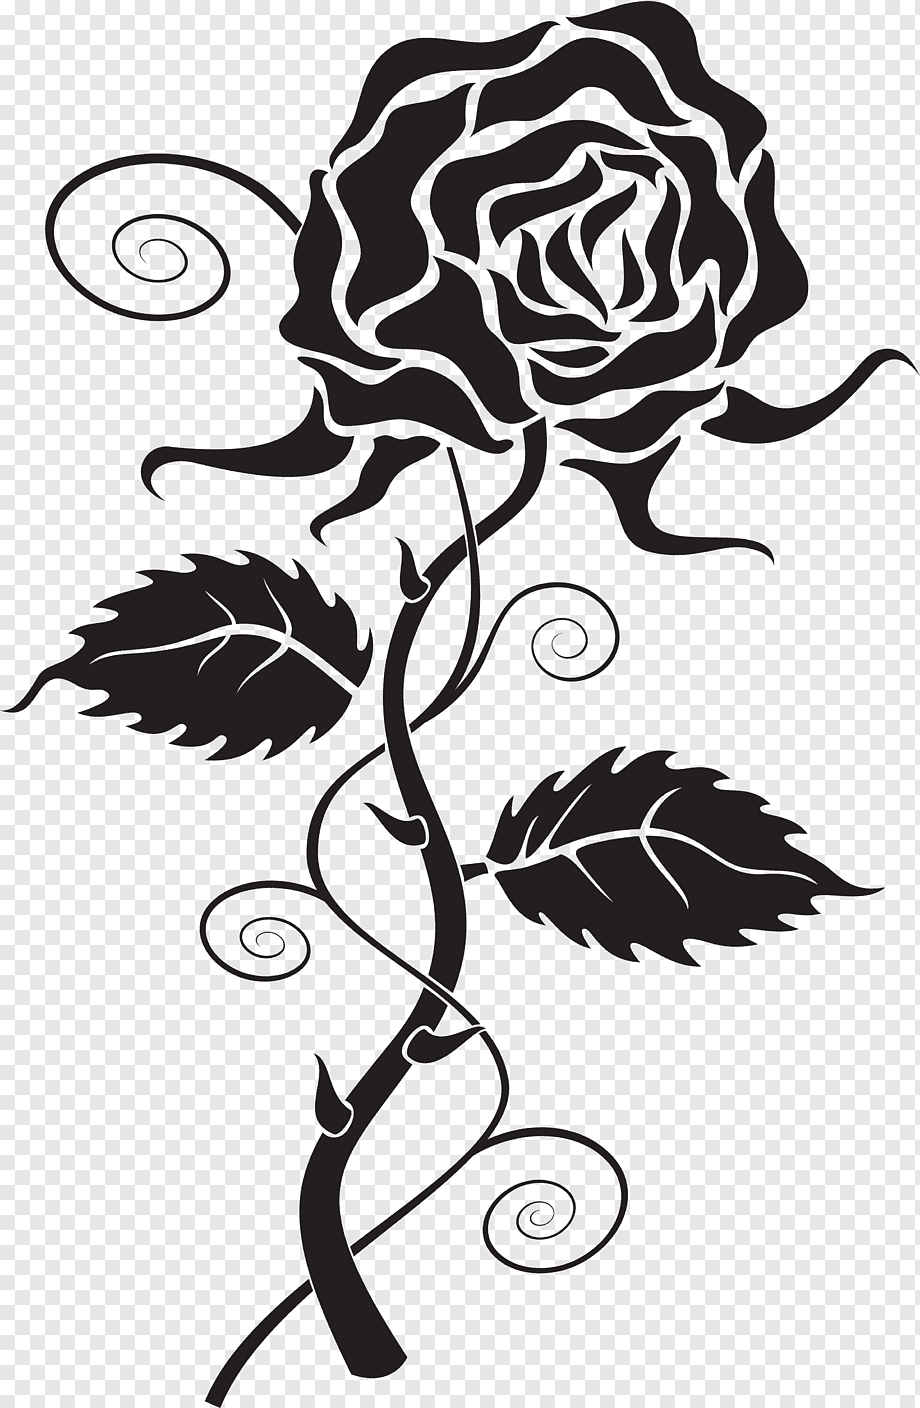 Silhouette Rose Frame Royalty Free SVG, Cliparts, Vectors, and Stock  Illustration. Image 14030827.